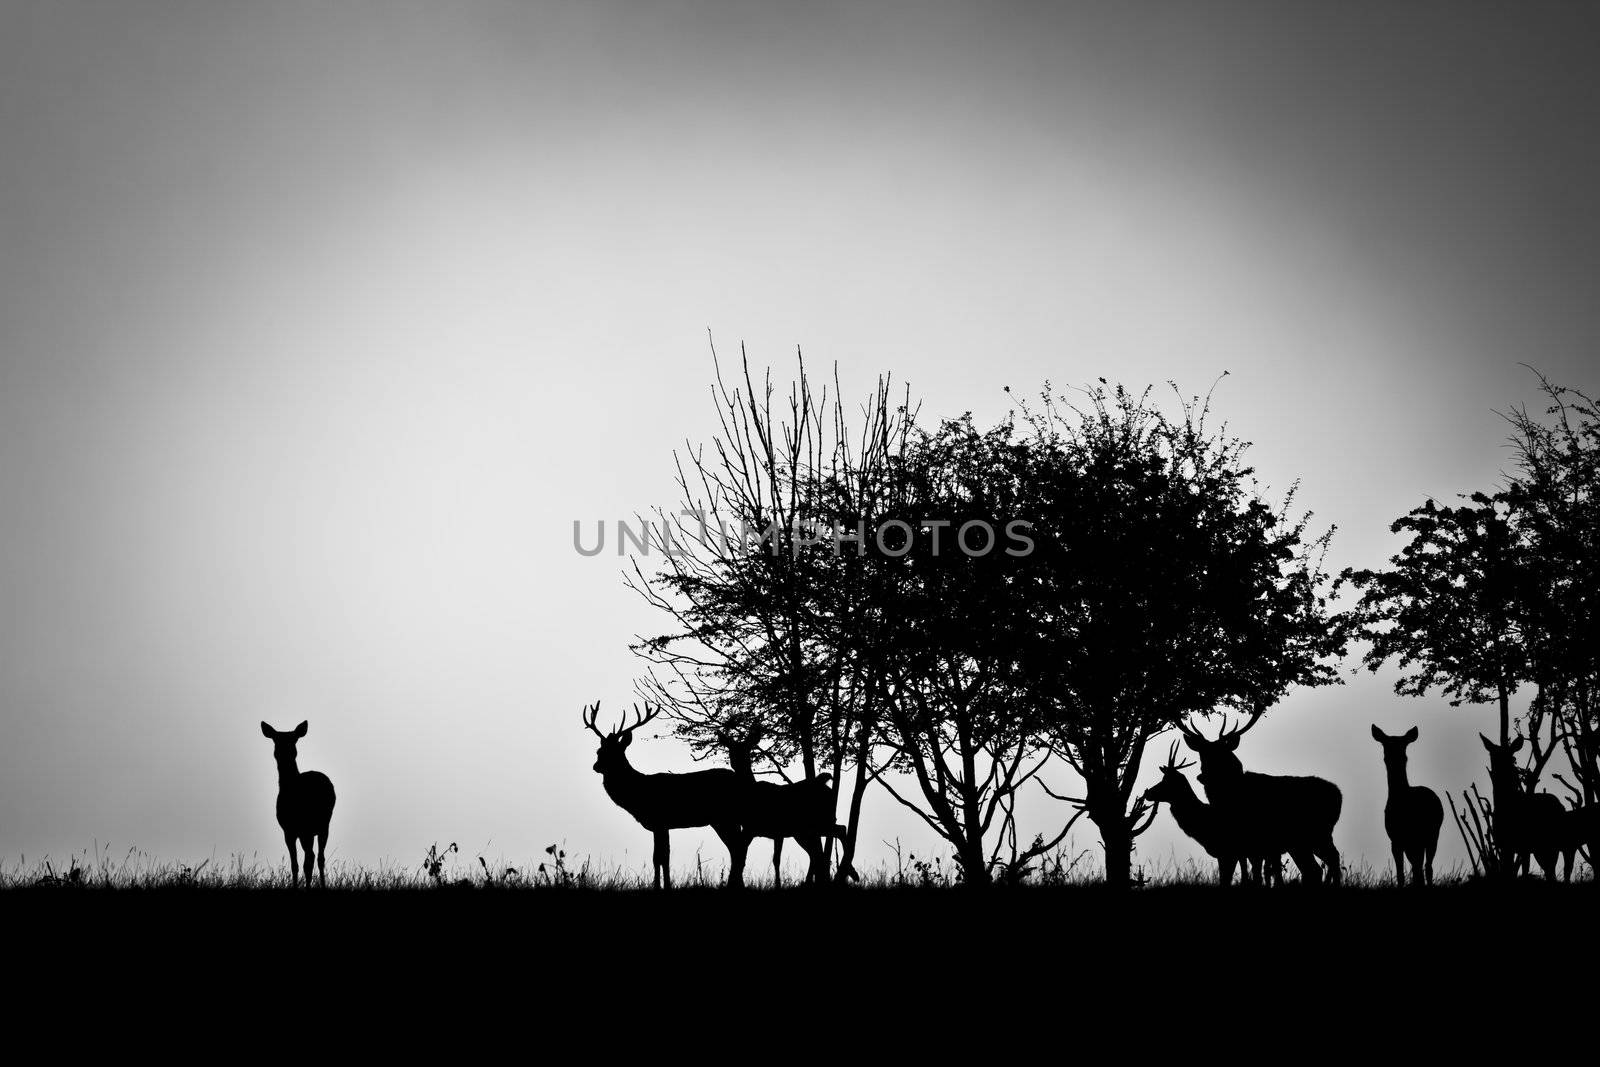 An image of some deer in the morning mist